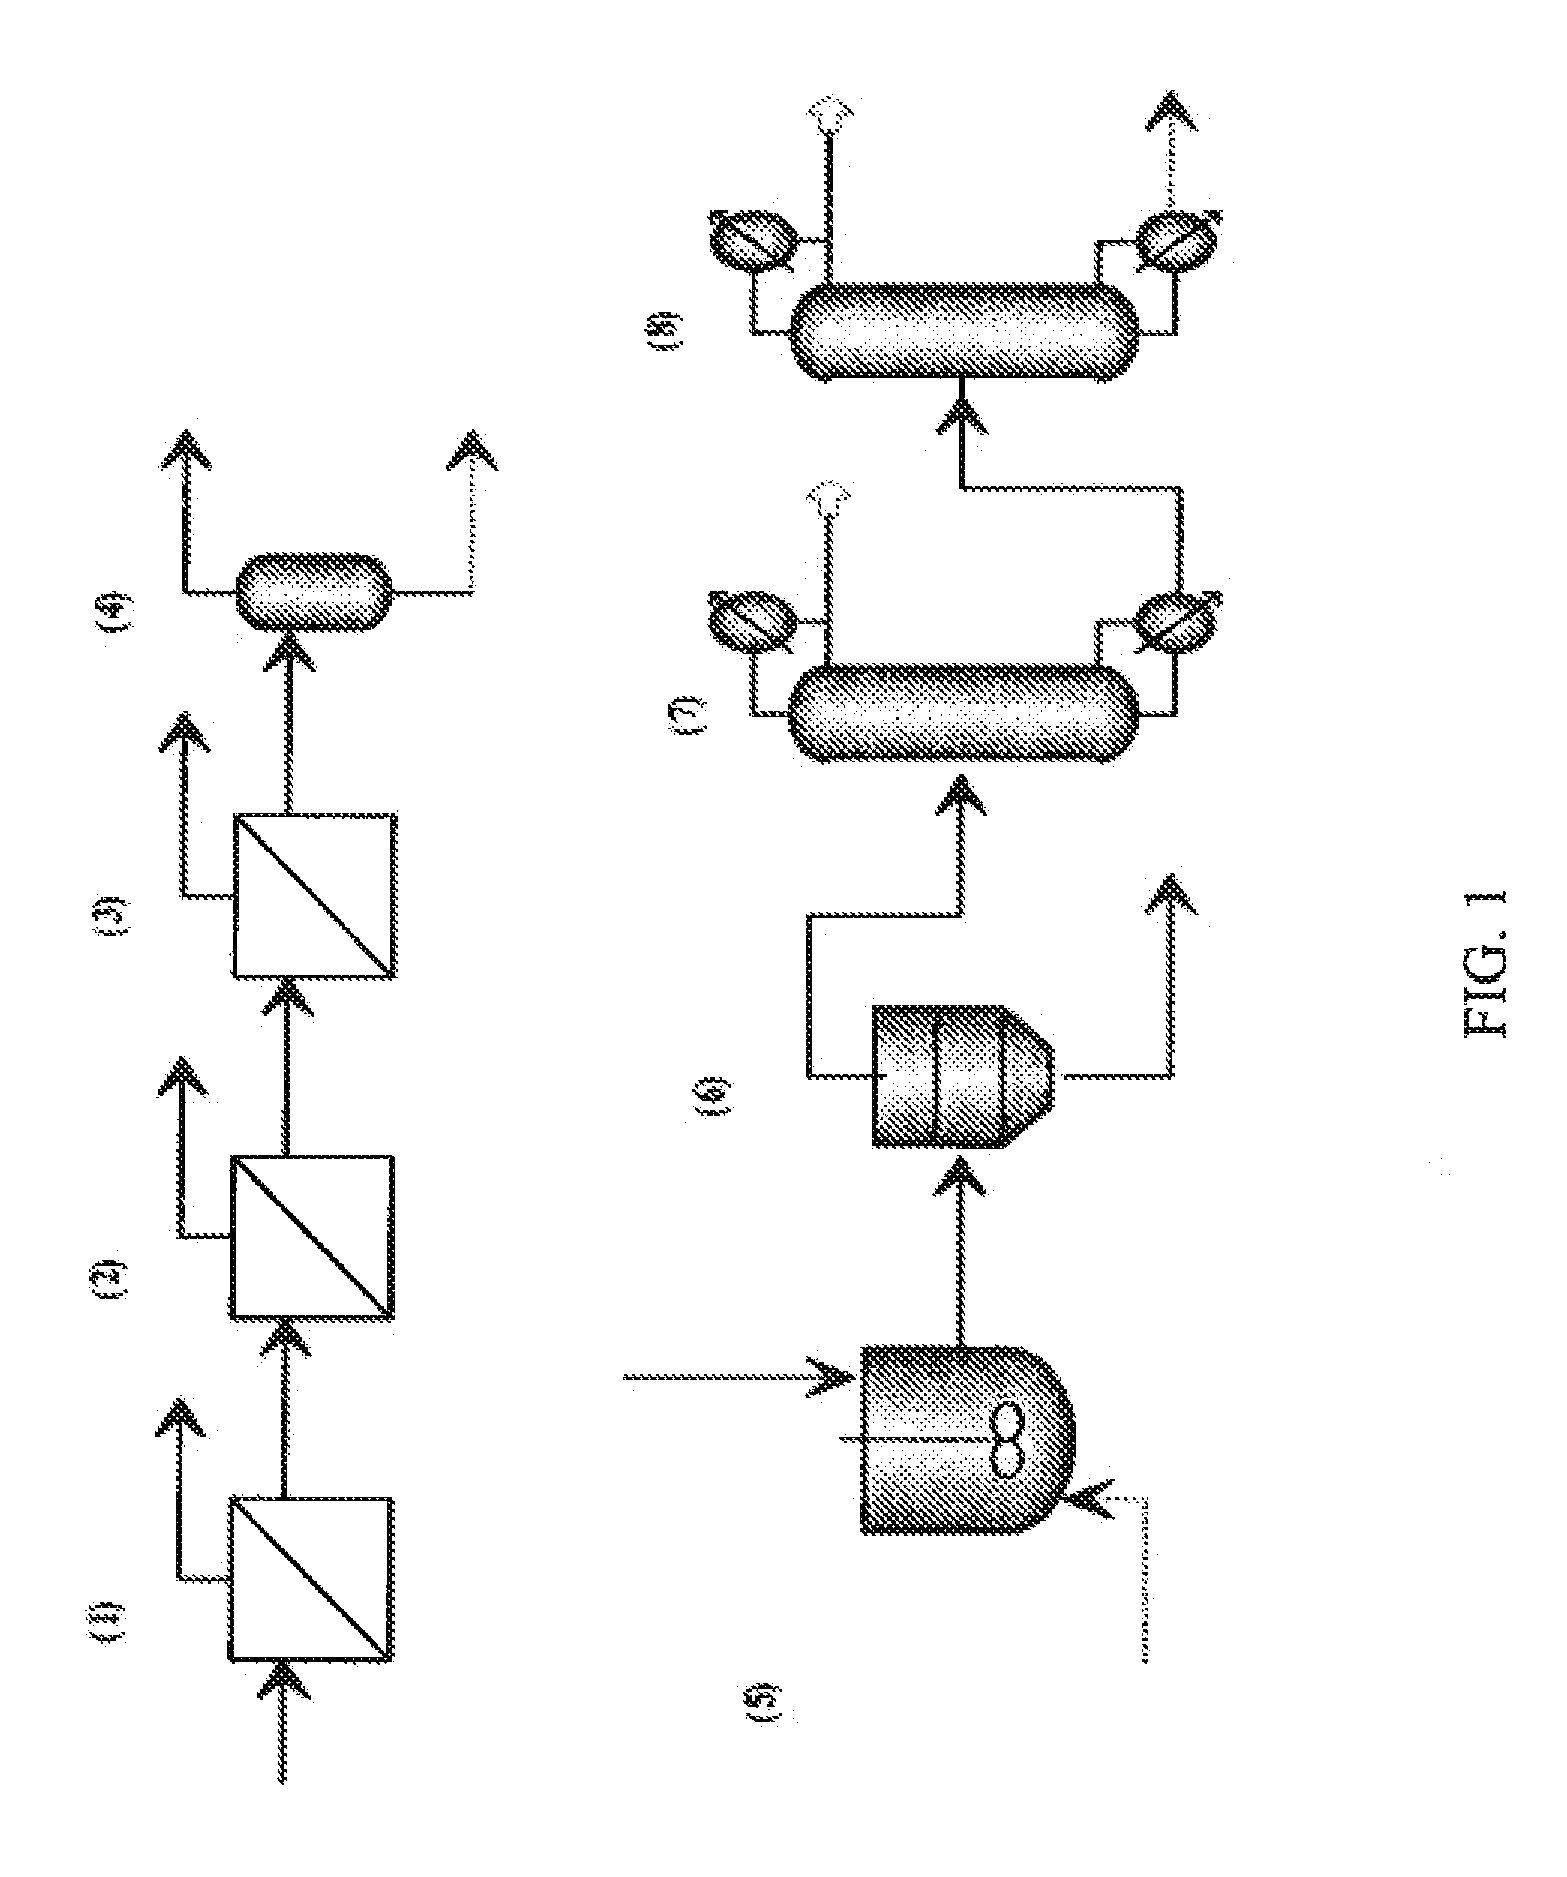 Method for purifying an alcohol from a fermentation broth using a falling film, a wiped film, a thin film or a short path evaporator